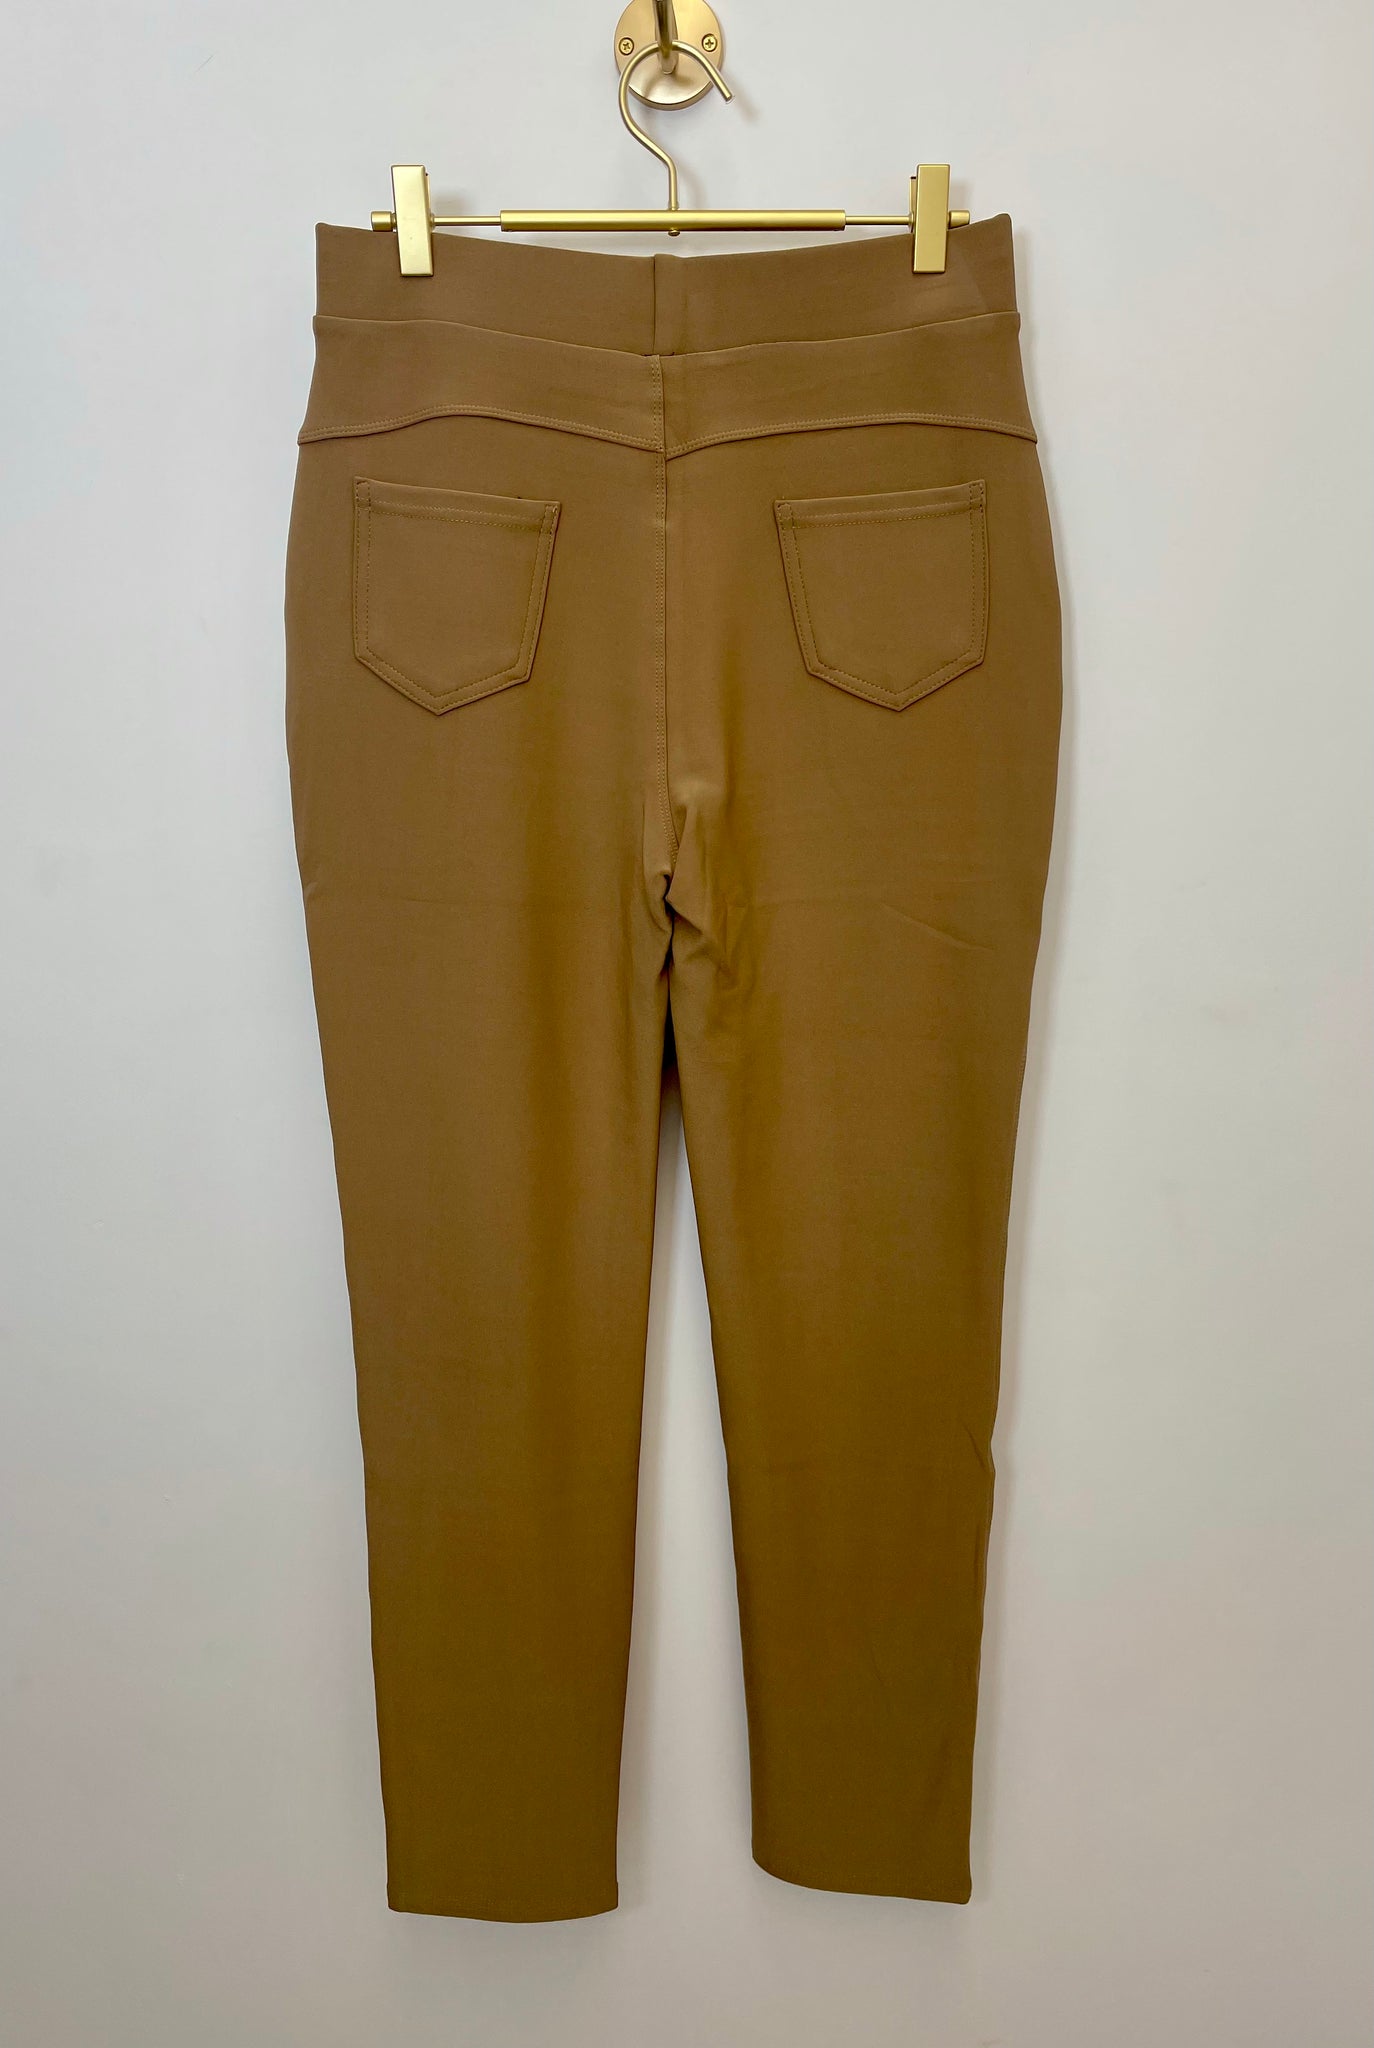 Pink Lily Collections - For colour shades on soft khaki trousers | Facebook